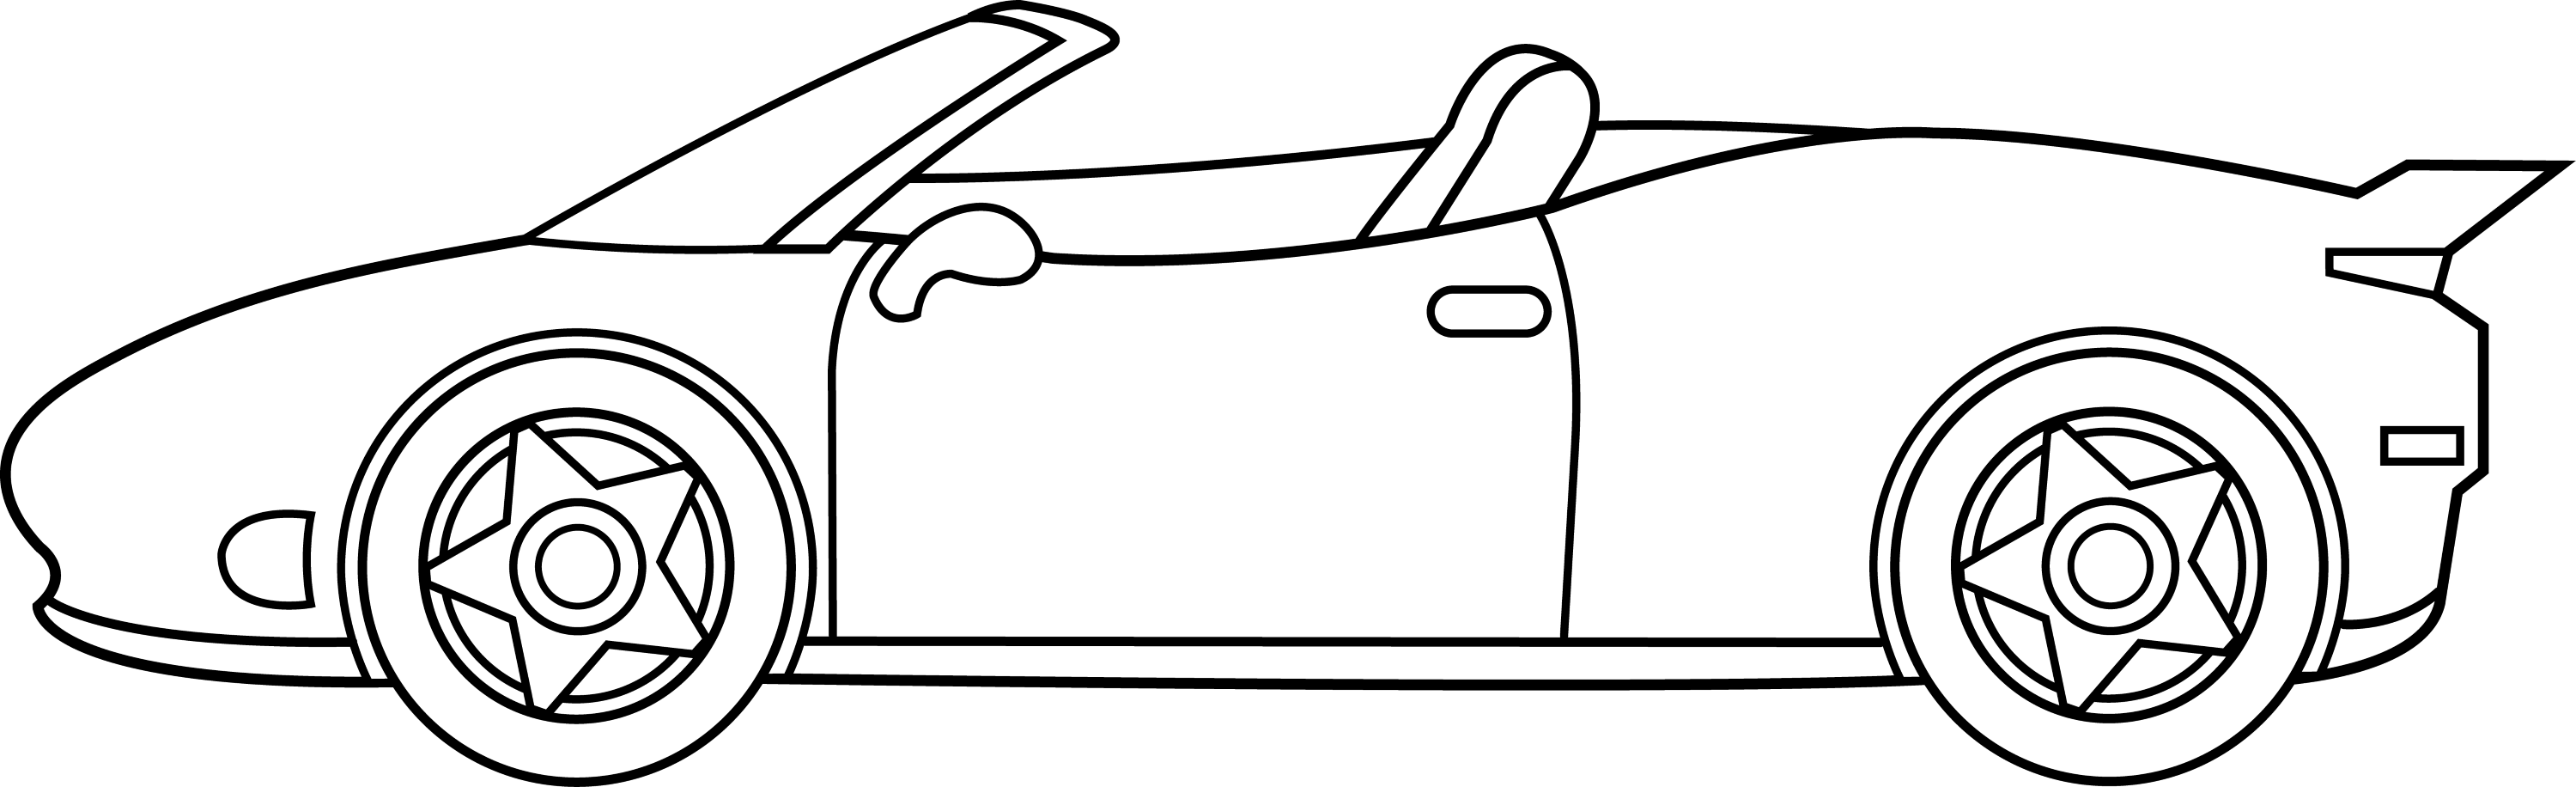 free black and white clipart of cars - photo #33